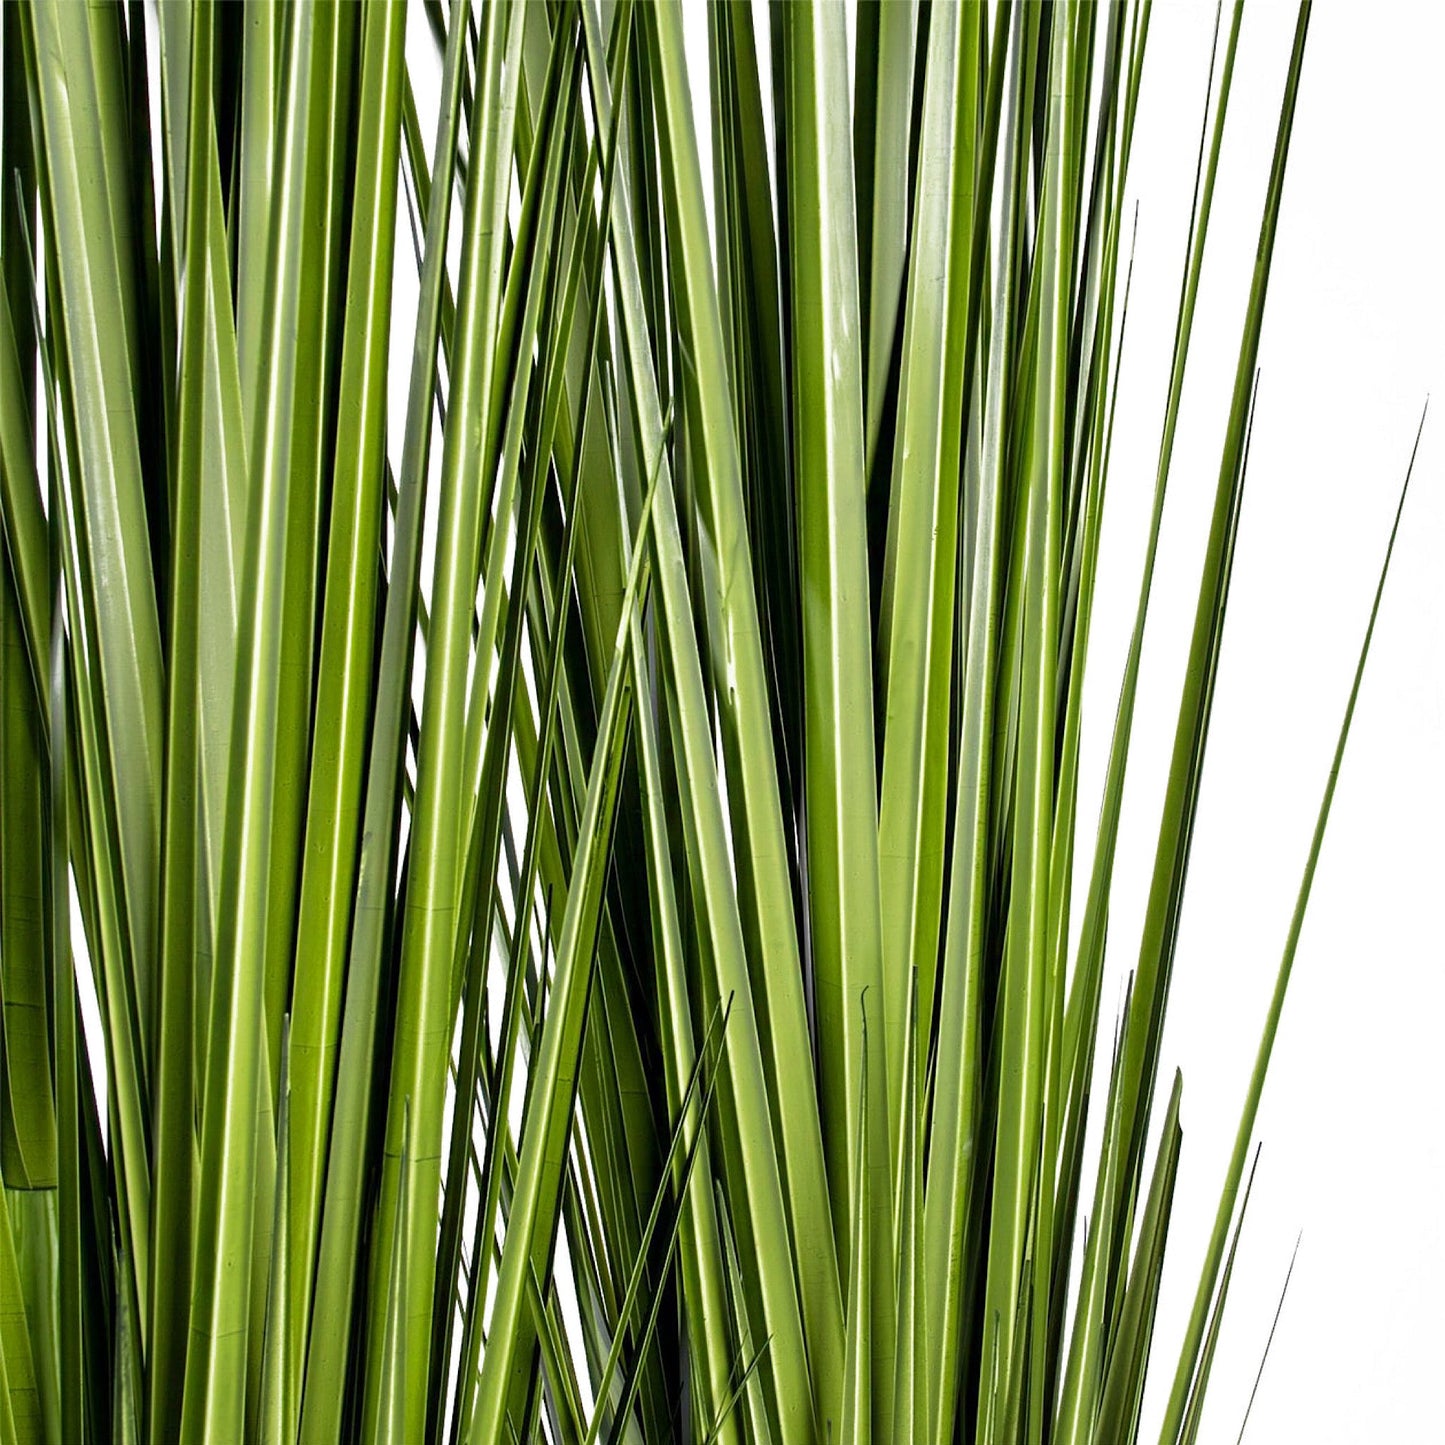 GRASS: CENTURY 86"H, POTTED